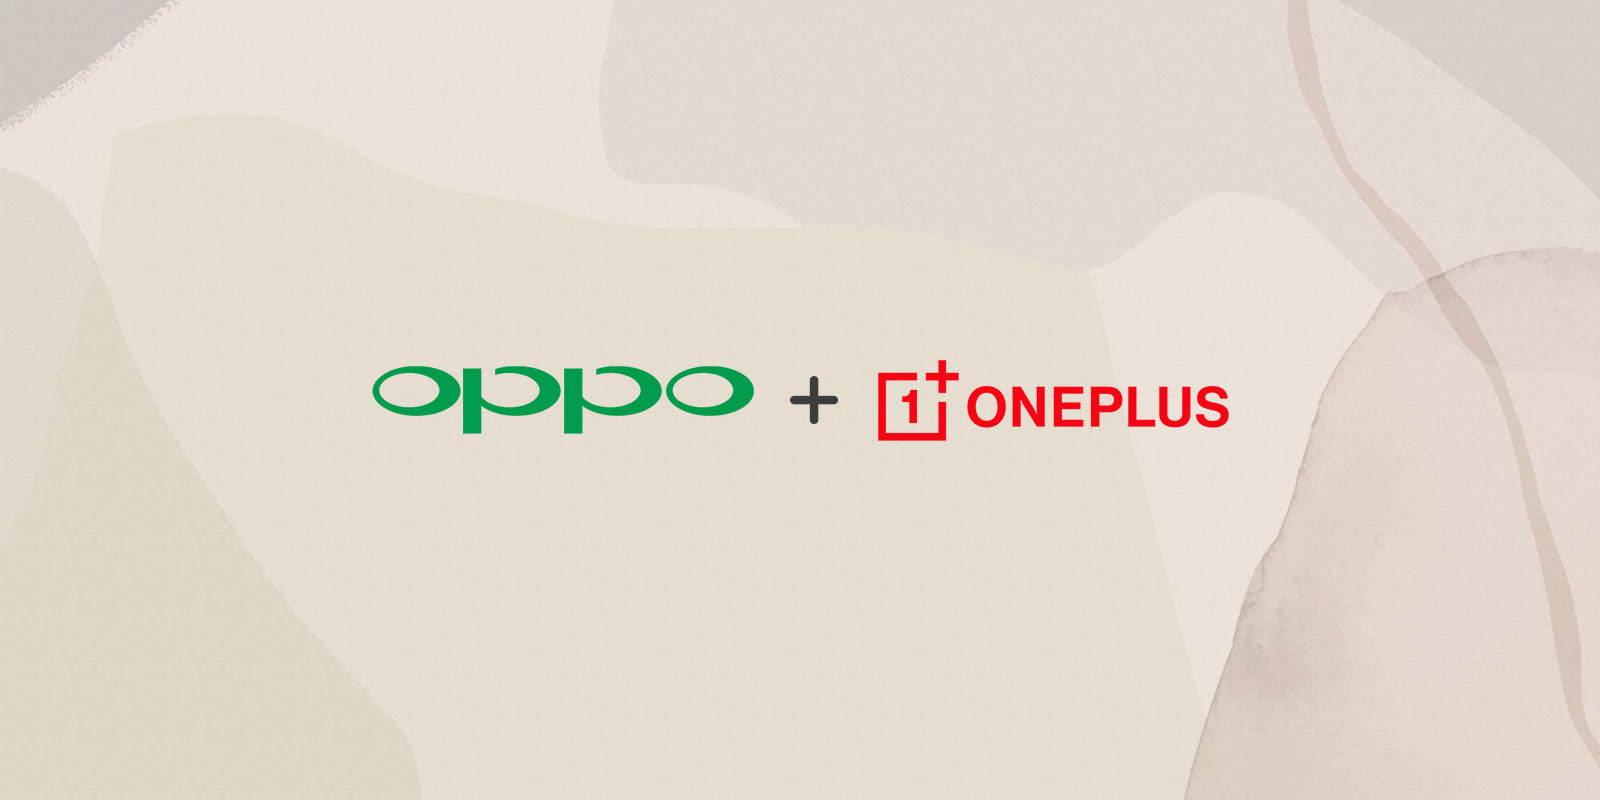 OnePlus merges with Oppo